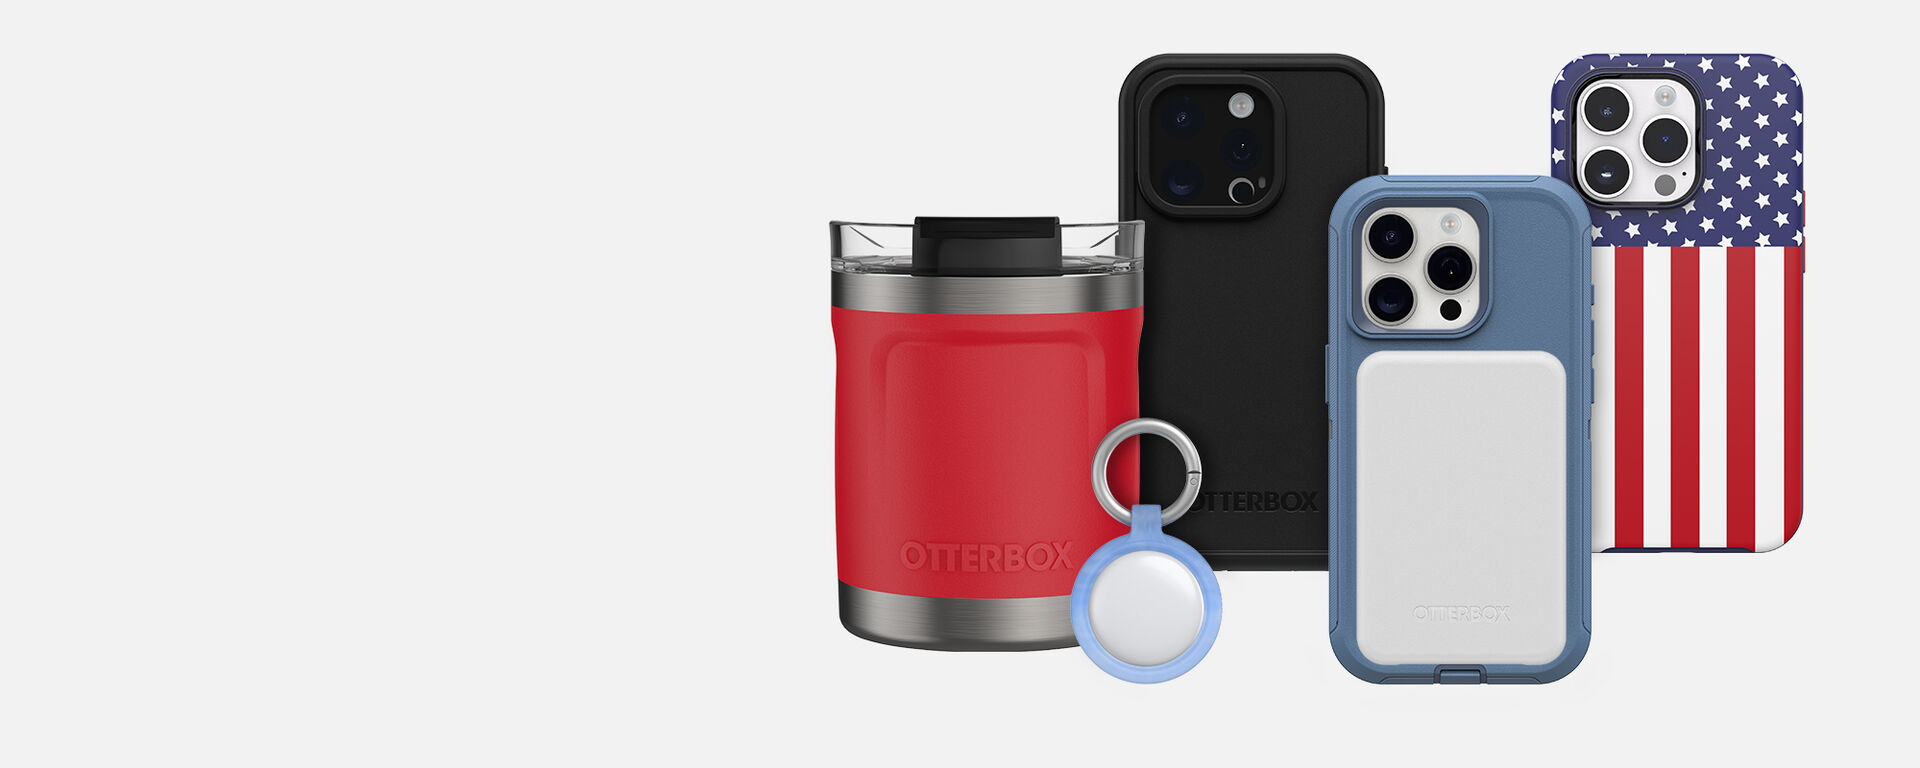 traveler shows off four France-inspired phone case designs